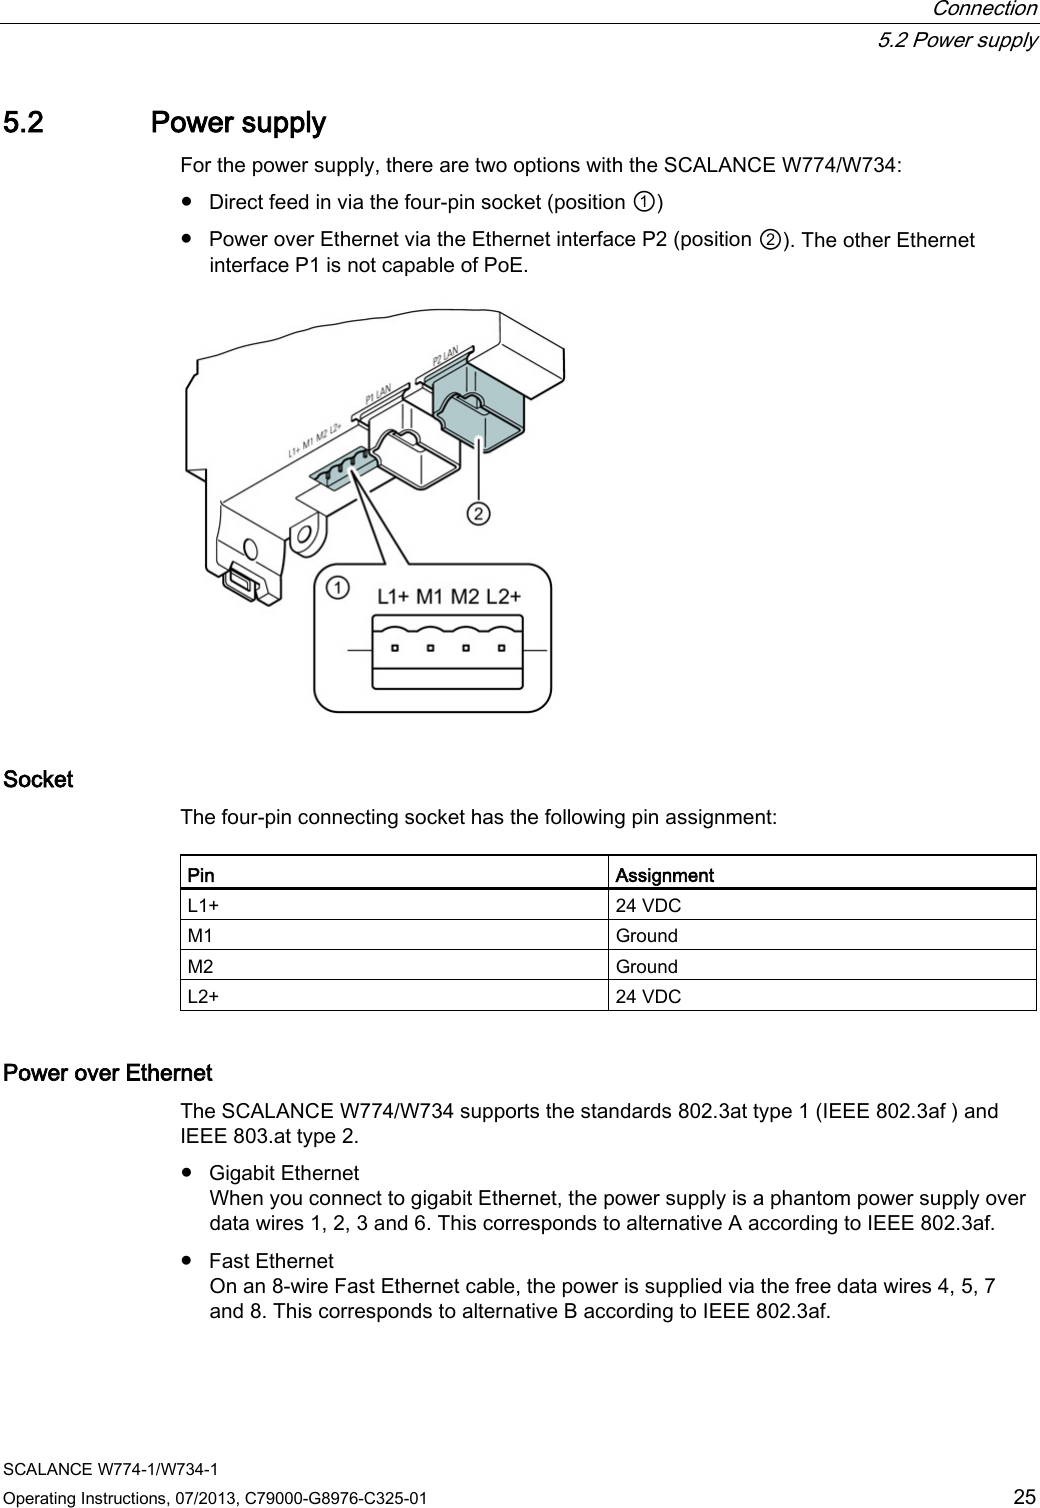  Connection  5.2 Power supply SCALANCE W774-1/W734-1 Operating Instructions, 07/2013, C79000-G8976-C325-01 25 5.2 Power supply For the power supply, there are two options with the SCALANCE W774/W734: ● Direct feed in via the four-pin socket (position ①) ● Power over Ethernet via the Ethernet interface P2 (position ②). The other Ethernet interface P1 is not capable of PoE.  Socket The four-pin connecting socket has the following pin assignment: Pin Assignment L1+ 24 VDC M1 Ground M2 Ground L2+ 24 VDC Power over Ethernet The SCALANCE W774/W734 supports the standards 802.3at type 1 (IEEE 802.3af ) and IEEE 803.at type 2. ● Gigabit Ethernet When you connect to gigabit Ethernet, the power supply is a phantom power supply over data wires 1, 2, 3 and 6. This corresponds to alternative A according to IEEE 802.3af. ● Fast Ethernet On an 8-wire Fast Ethernet cable, the power is supplied via the free data wires 4, 5, 7 and 8. This corresponds to alternative B according to IEEE 802.3af. 